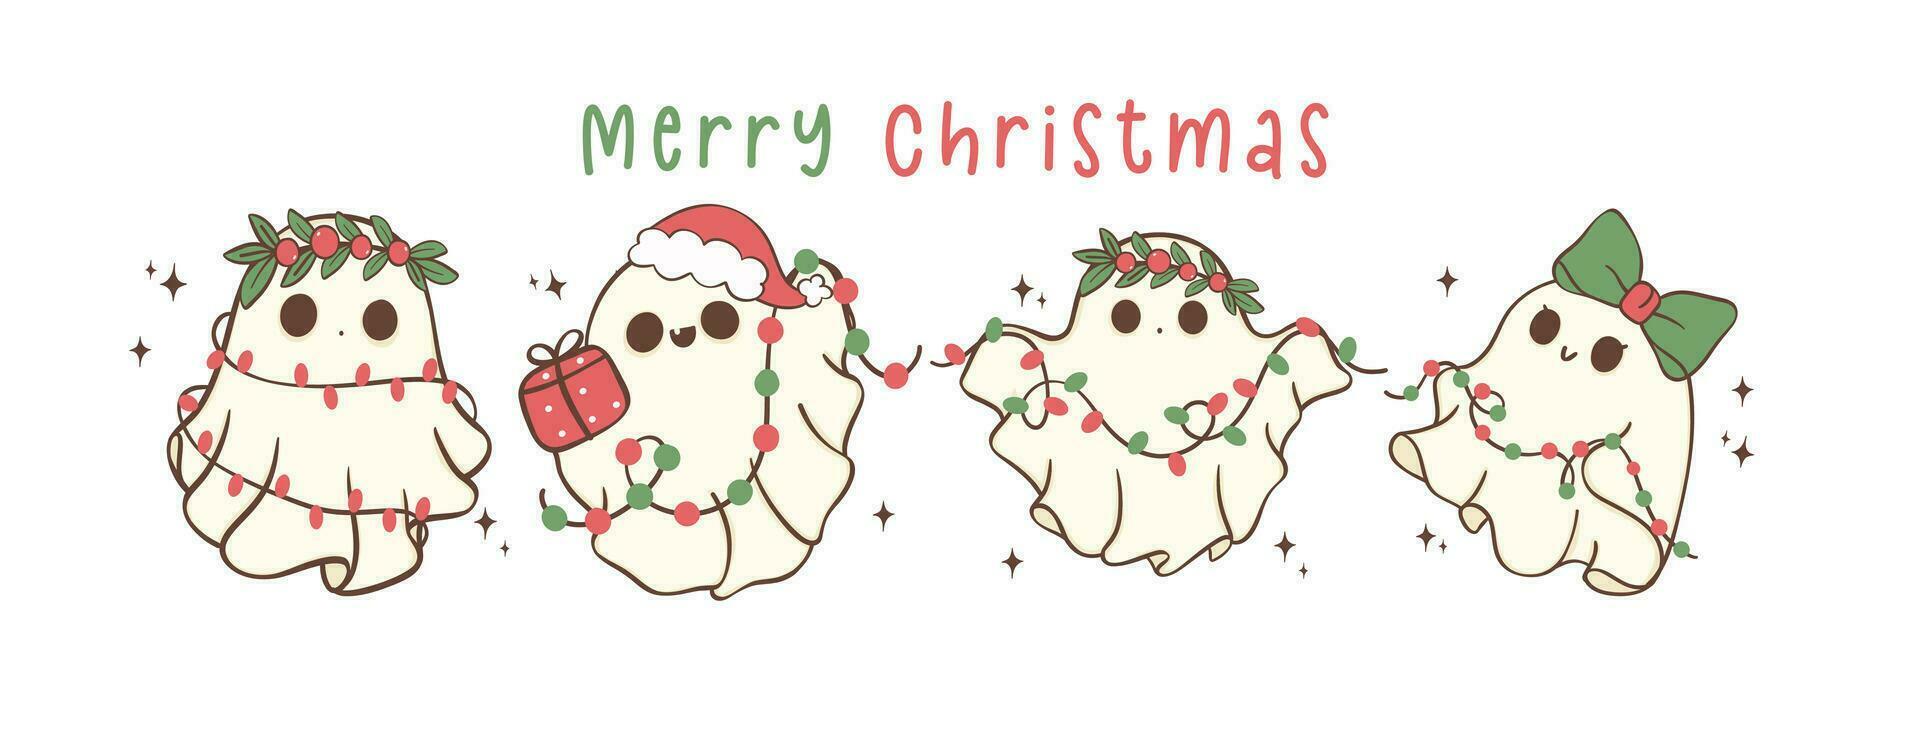 Group of Cute and Kawaii Christmas Ghosts with lights. Festive greeting card banner, Holiday Cartoon Hand Drawing with adorable pose. vector